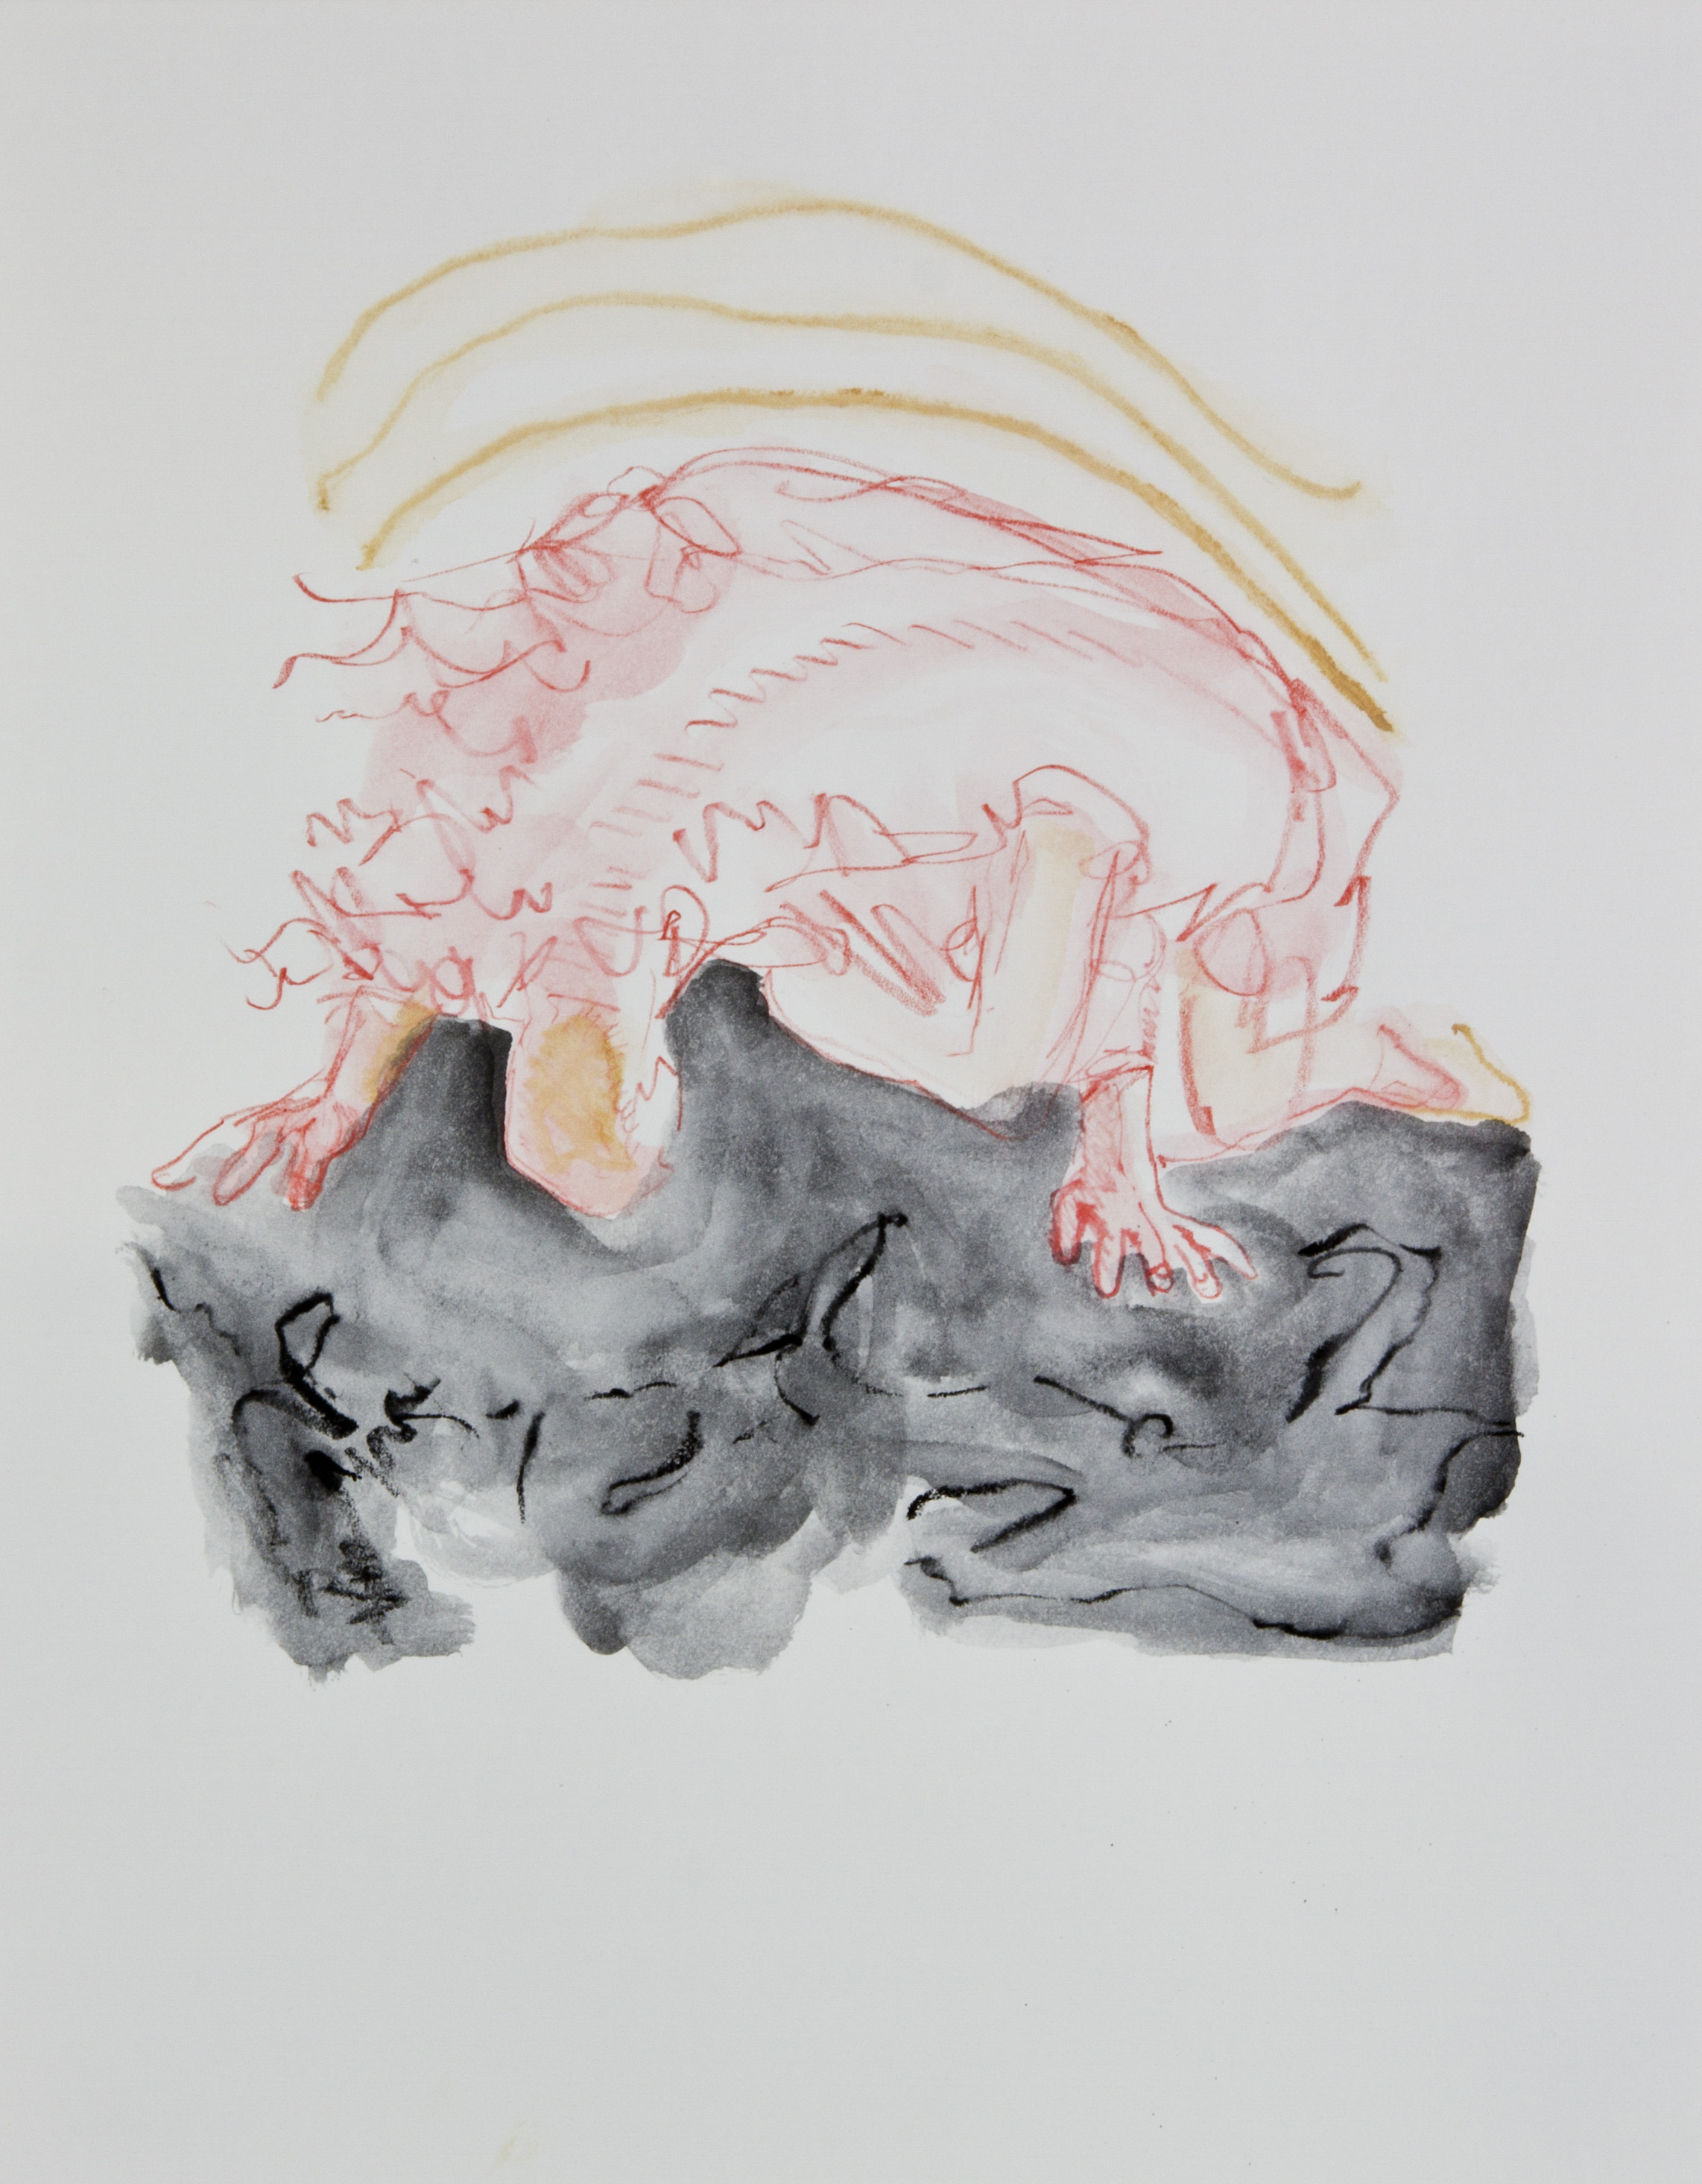 Bowing To The Abyss, 2013, graphite, crayon and watercolor pencil on paper, 11x14 inches